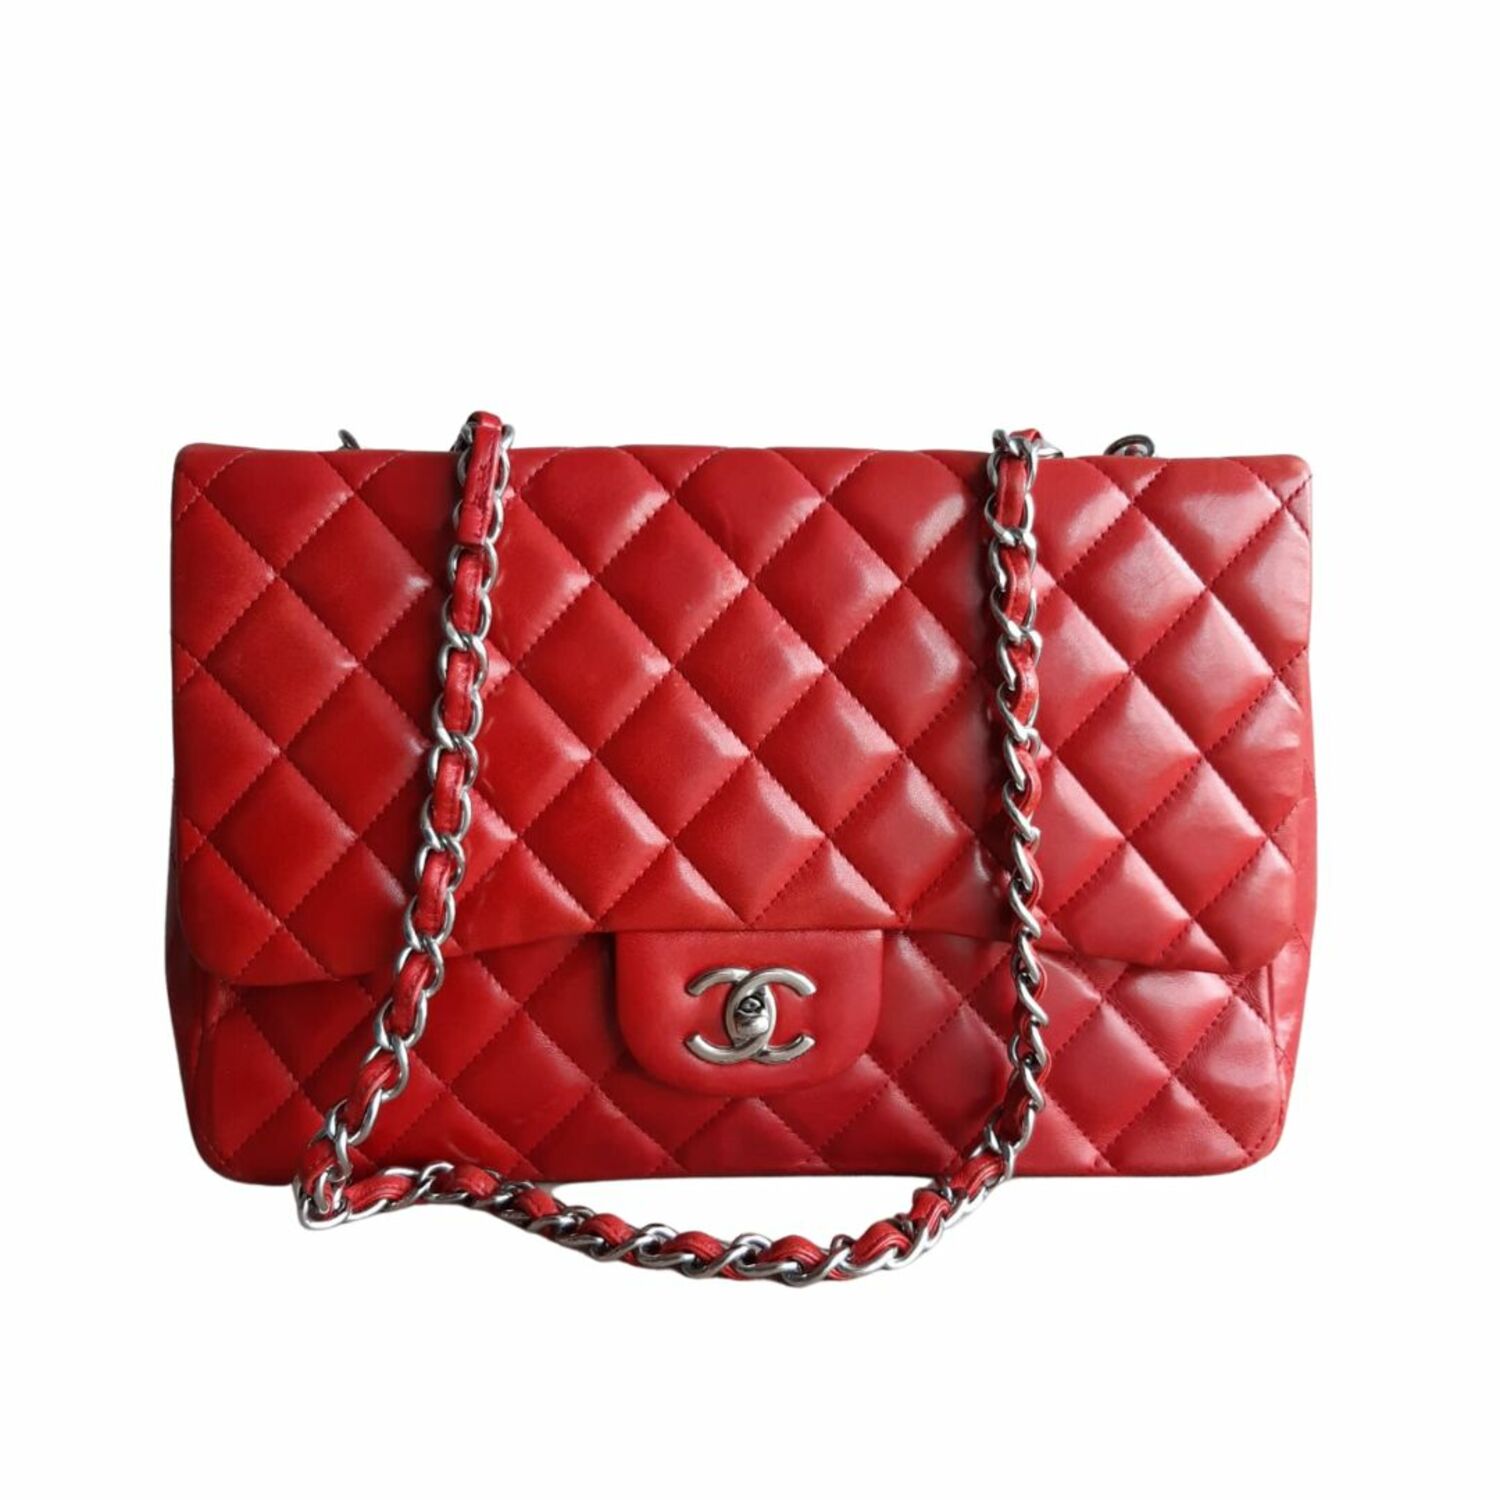 Lambskin Quilted Flap Chanel buy preowned at 6160 EUR